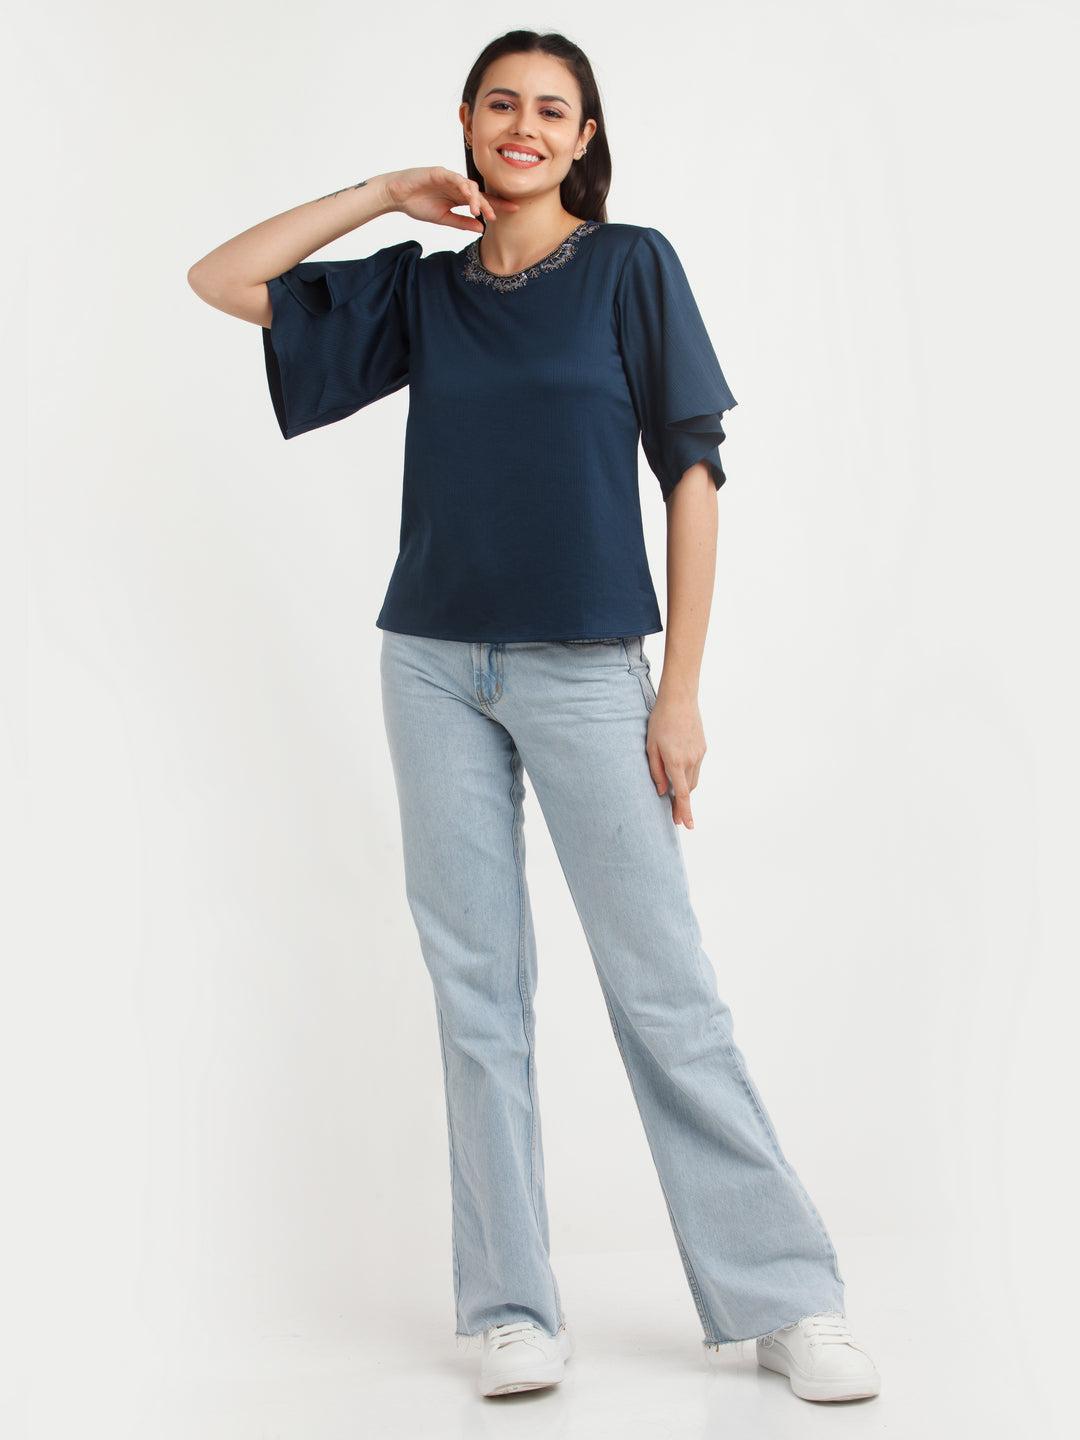 navy-blue-solid-top-for-women